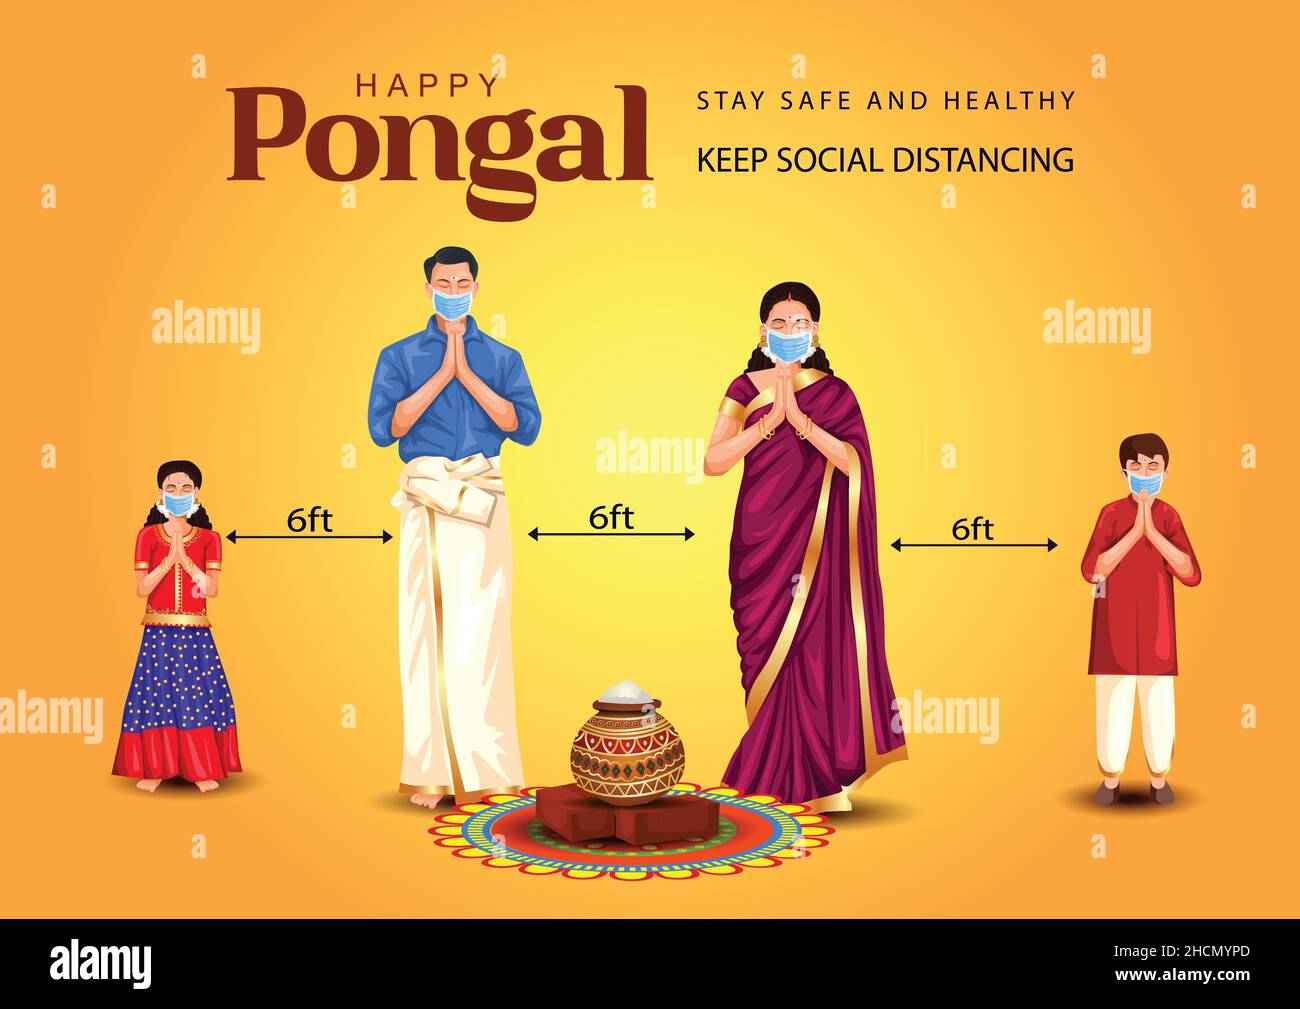 Happy Pongal celebration with sugarcane, Rangoli, pot and rice. Tamil family offering prayers. Indian cultural festival celebration concept vector ill Stock Vector